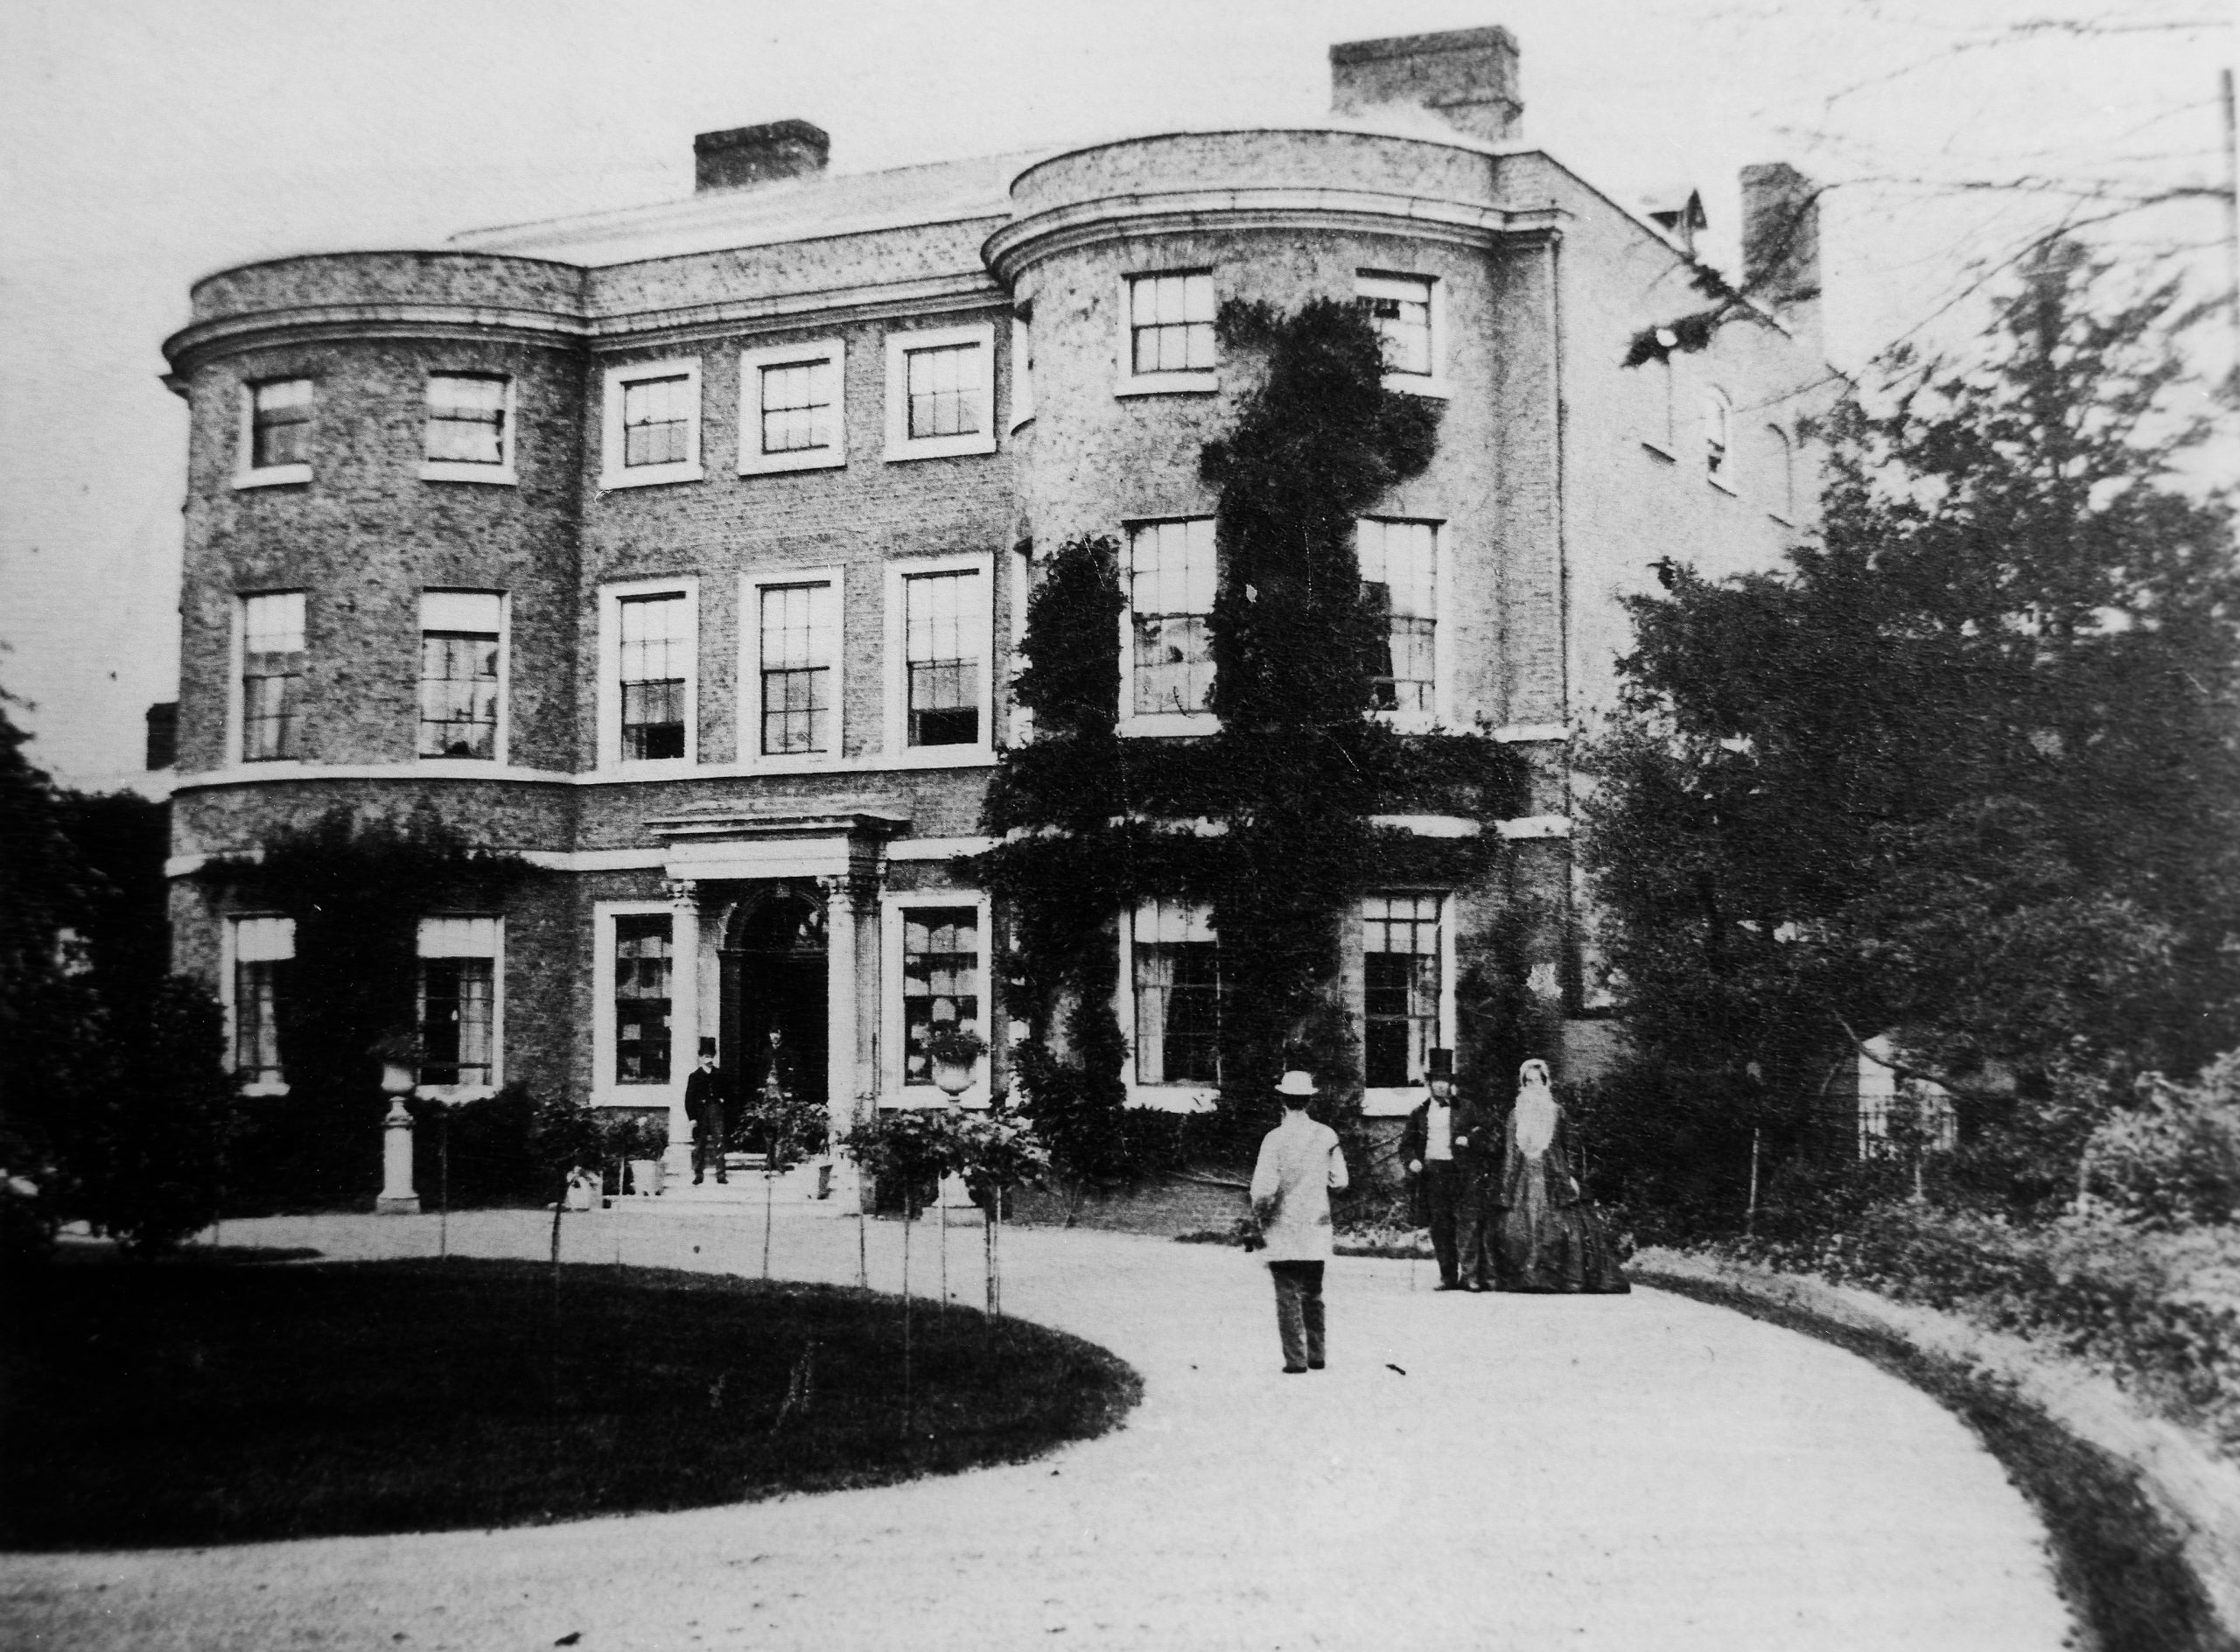 Archive image of the building when it was the home of the Morris family. In black and white.